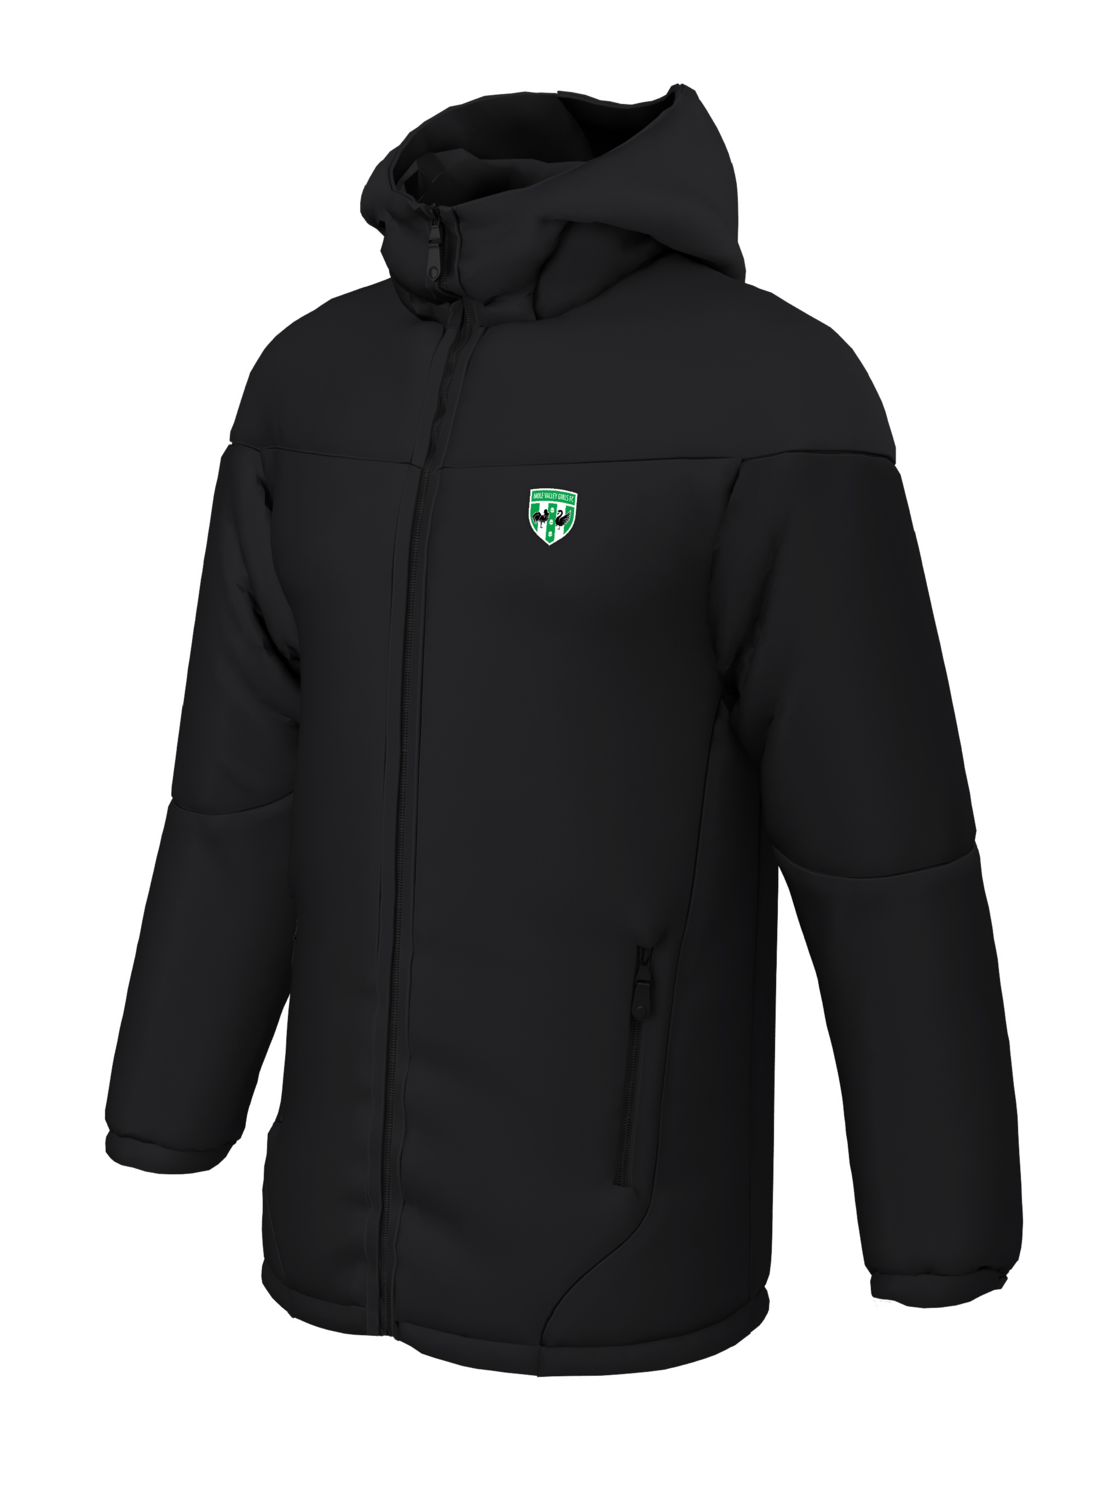 Mole Valley Girls Coaches FC contoured thermal jacket / coat